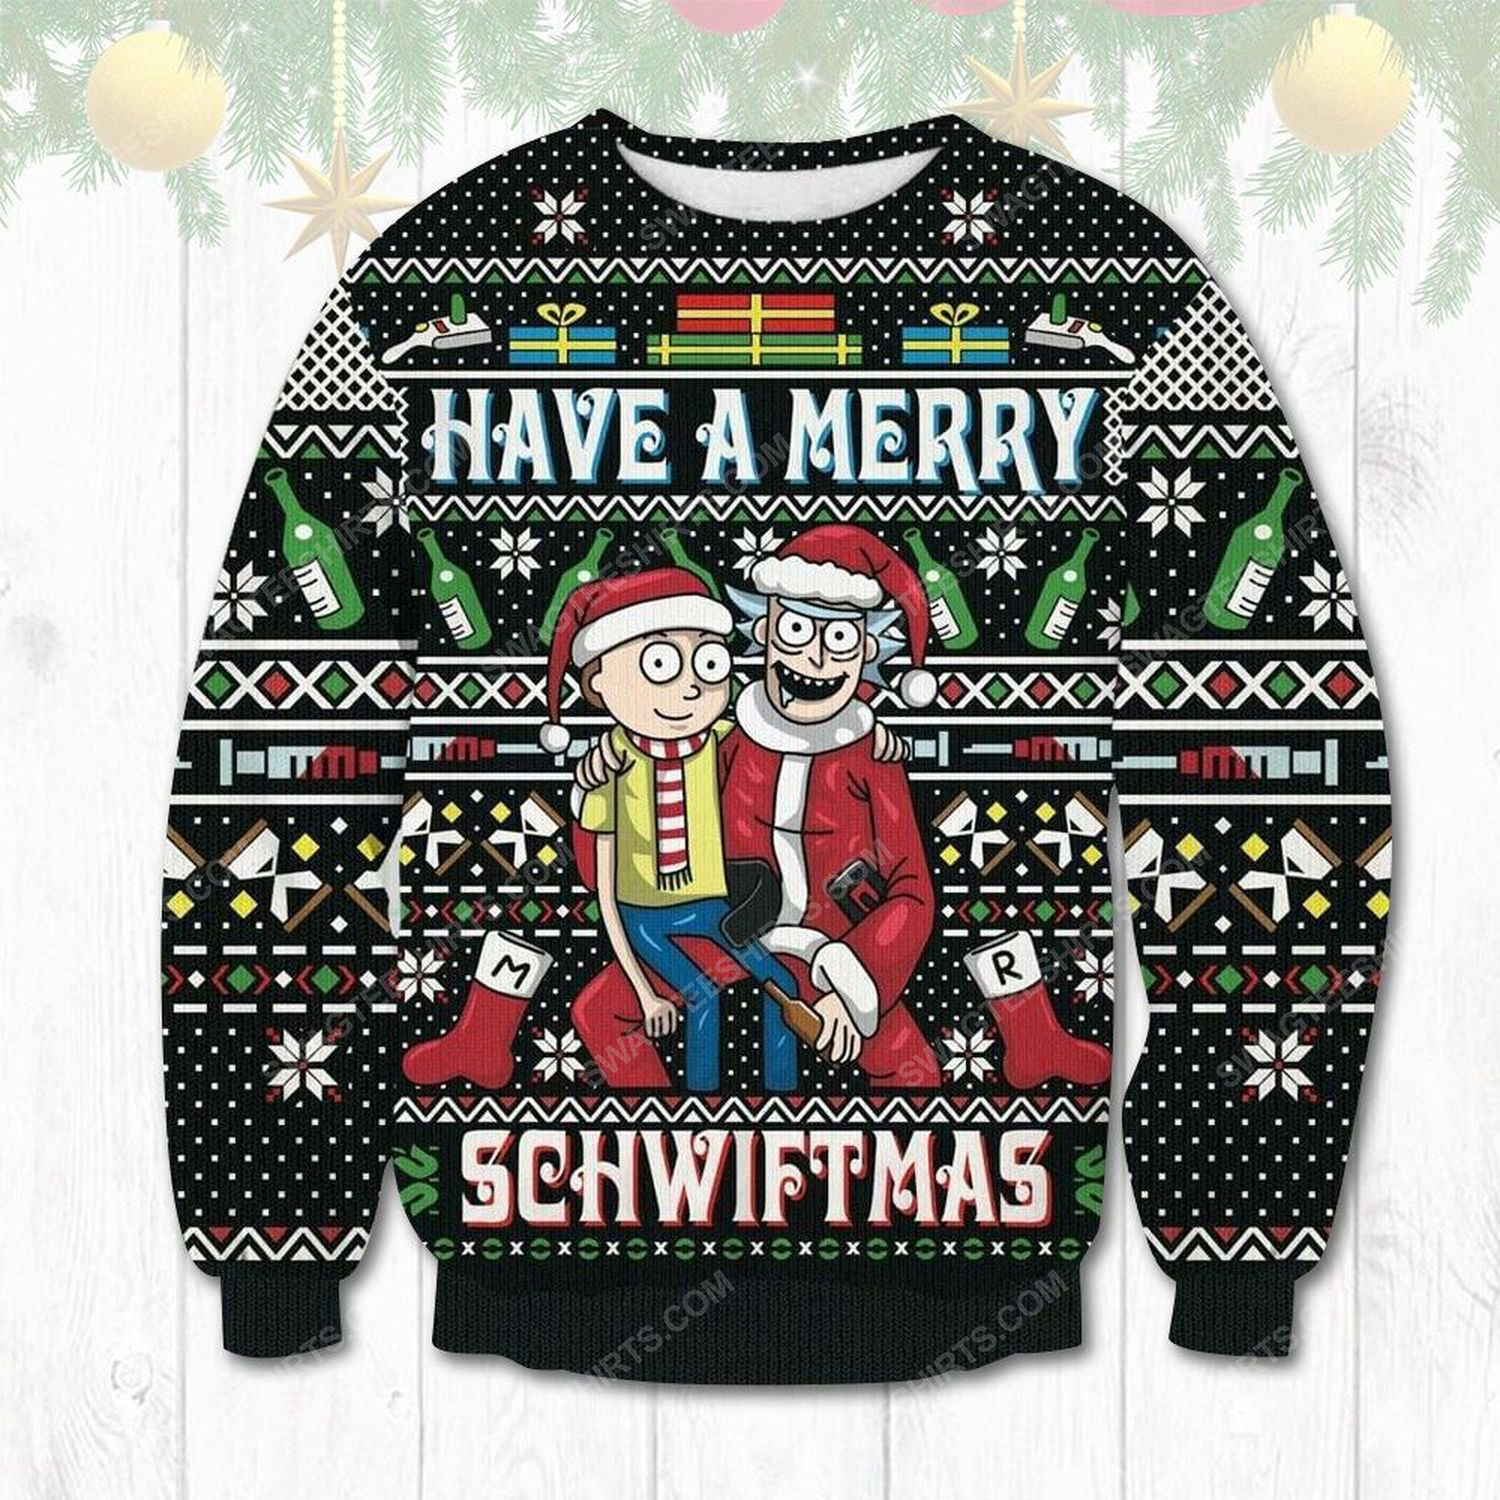 Have a merry schwiftmas rick and morty ugly christmas sweater